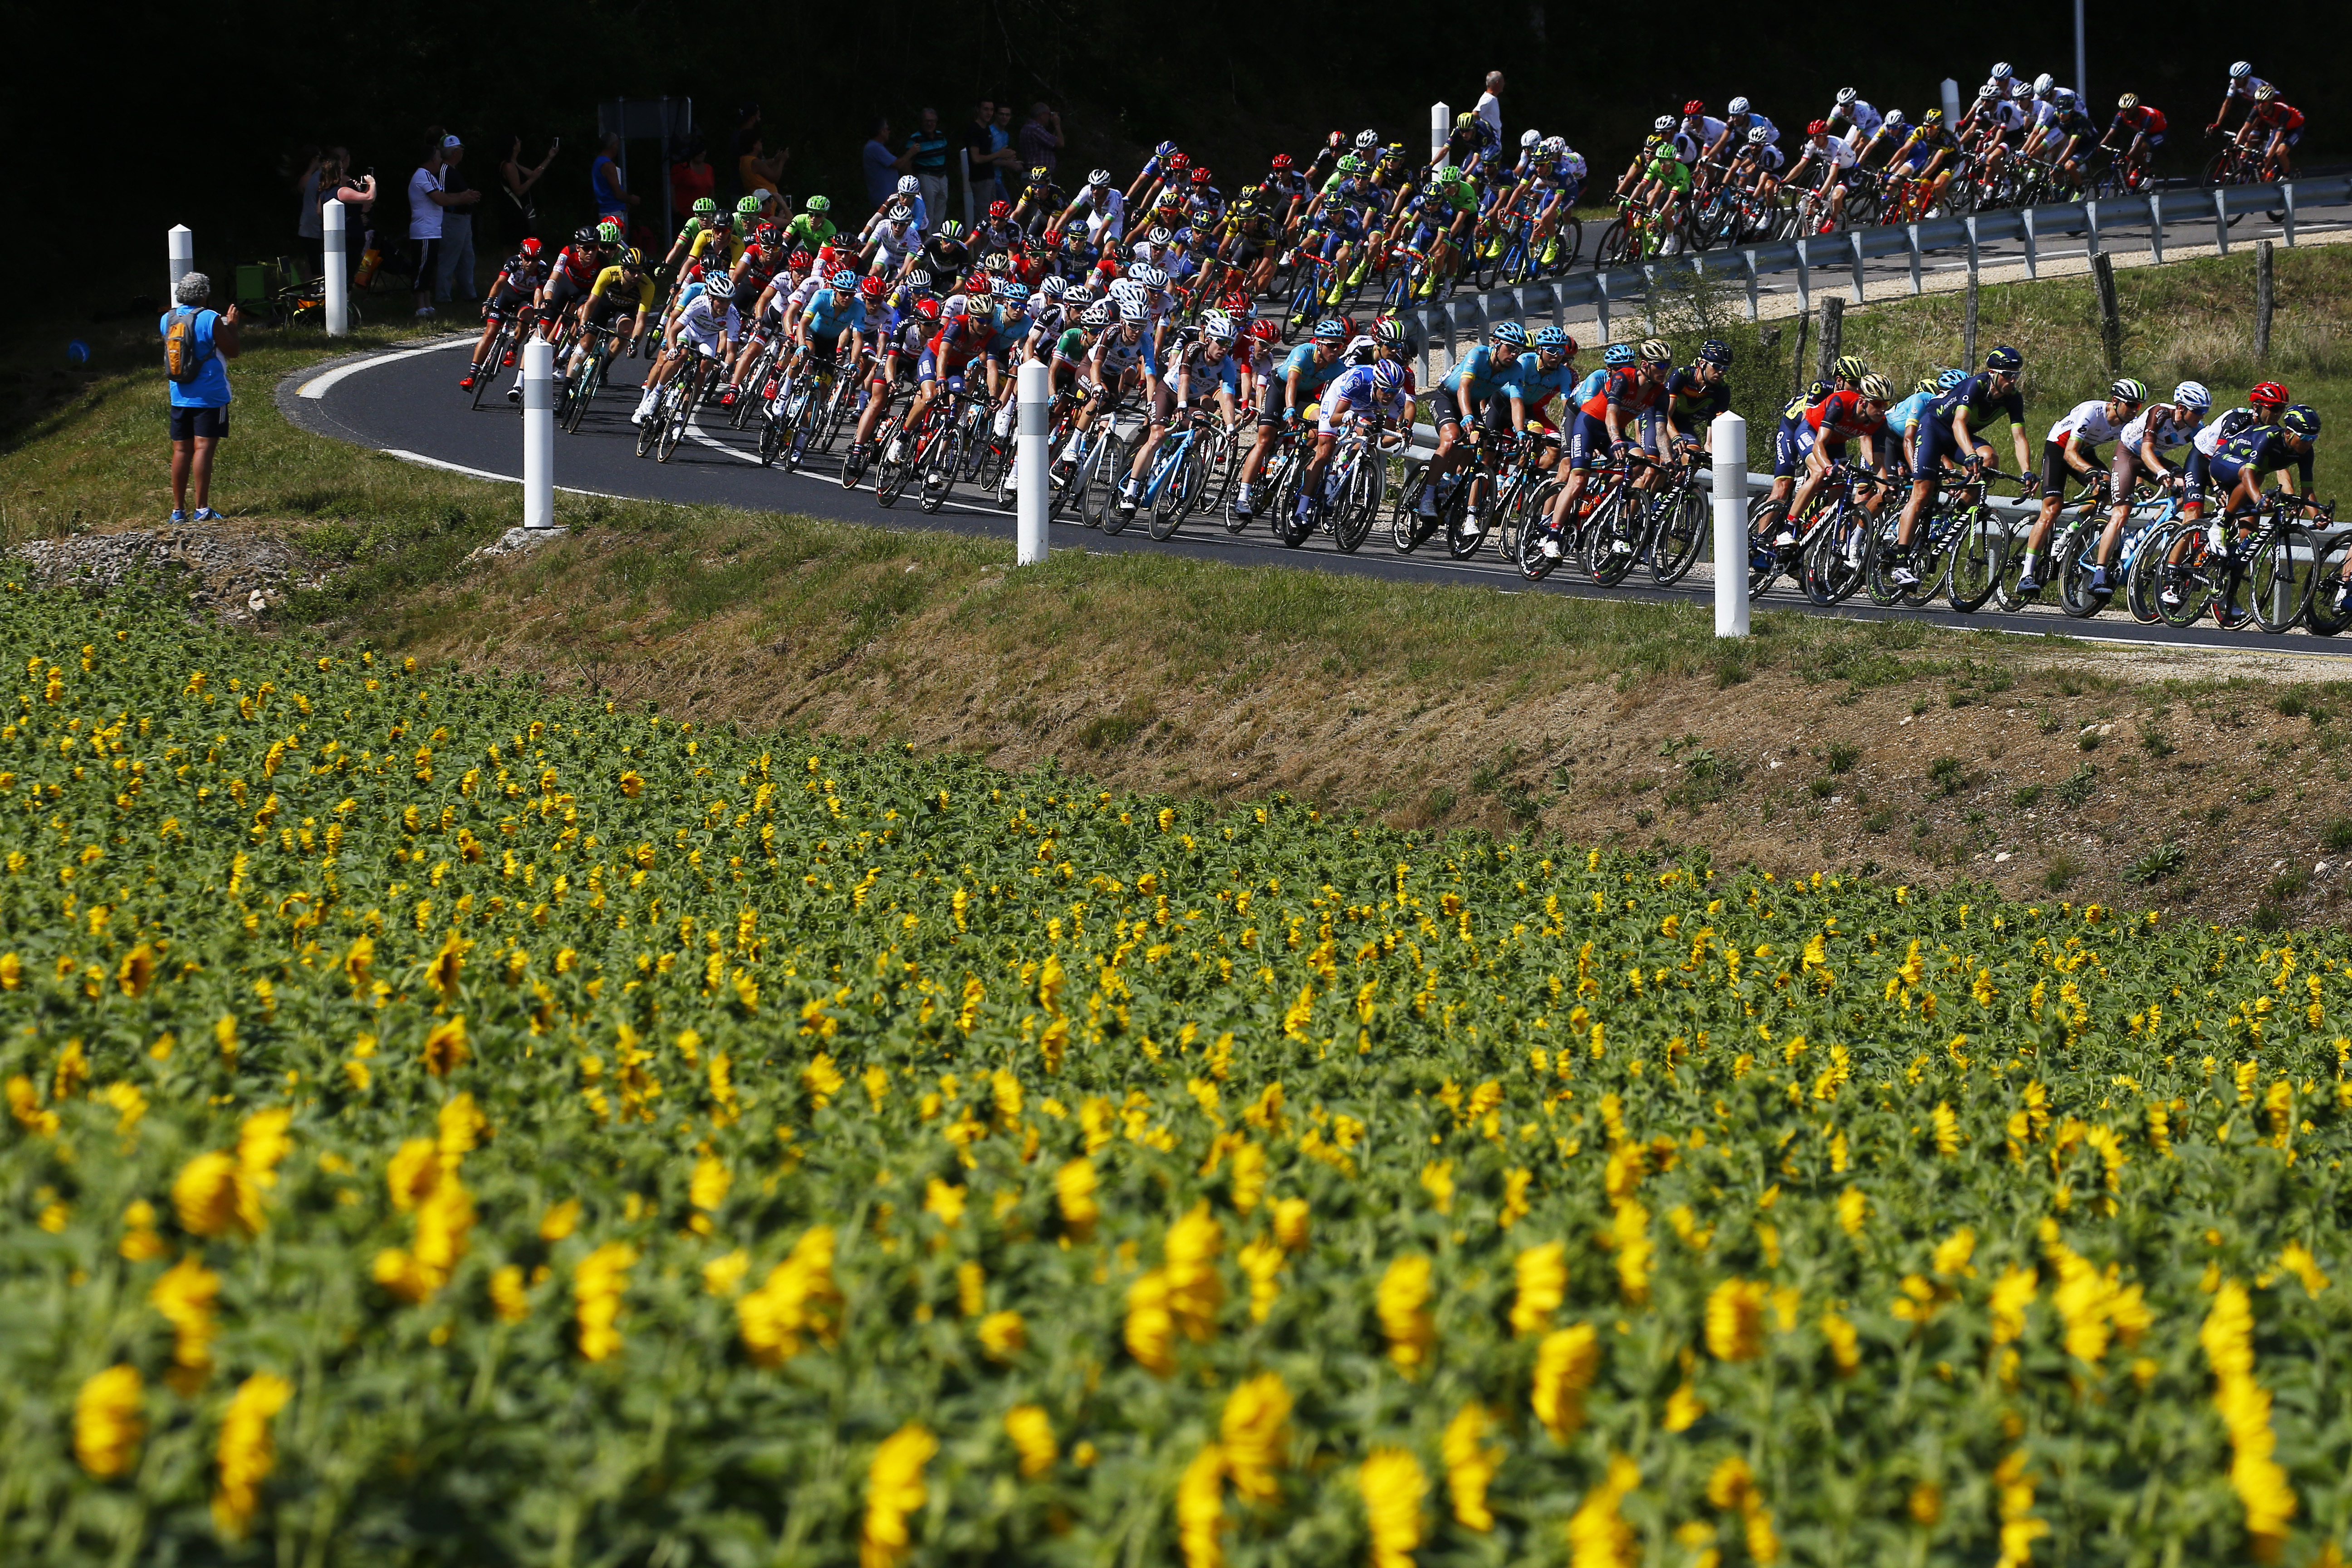 The pack speeds downhill during the fourth stage of the Tour de France cycling race over 207.5 kilometers (129 miles) with start in Mondorf-les-Bains, Luxembourg, and finish in Vittel, France, Tuesday, July 4, 2017. (AP Photo/Peter Dejong)